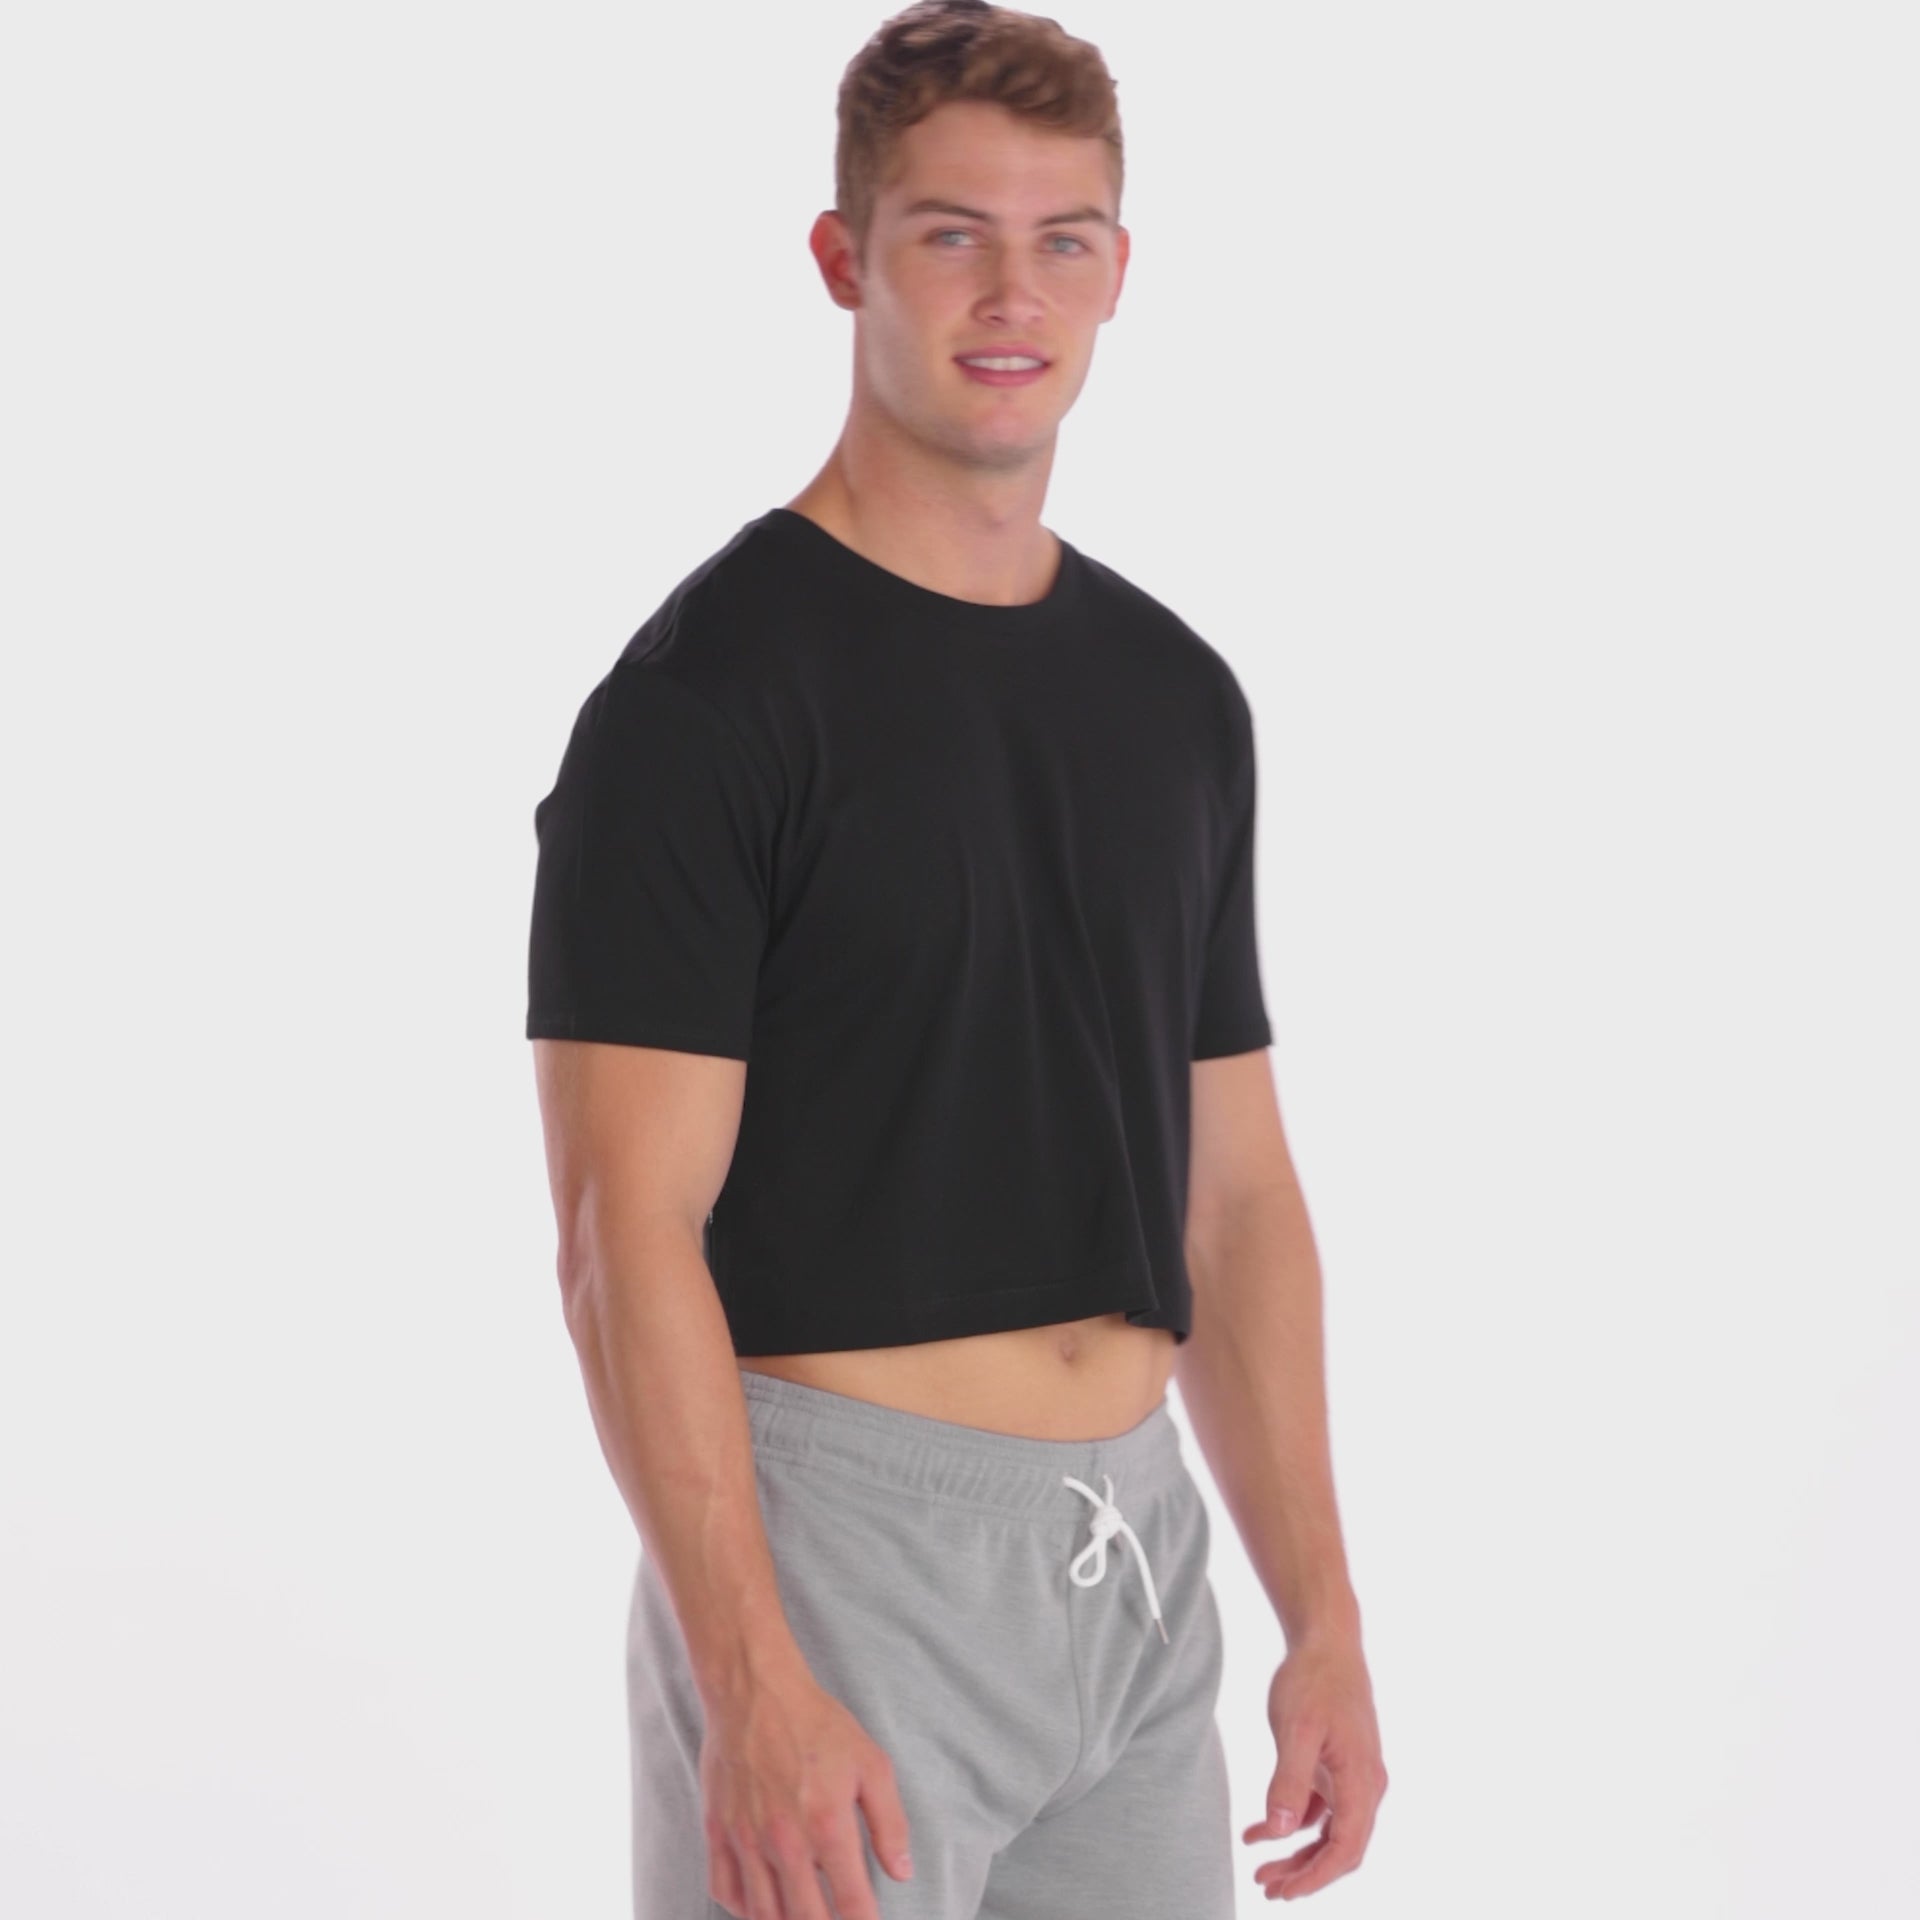 Men's Black Pima Cotton Midriff Crop T-Shirt Top by SAMMY Menswear, an LGBTQ-Owned, Sustainable, American Brand